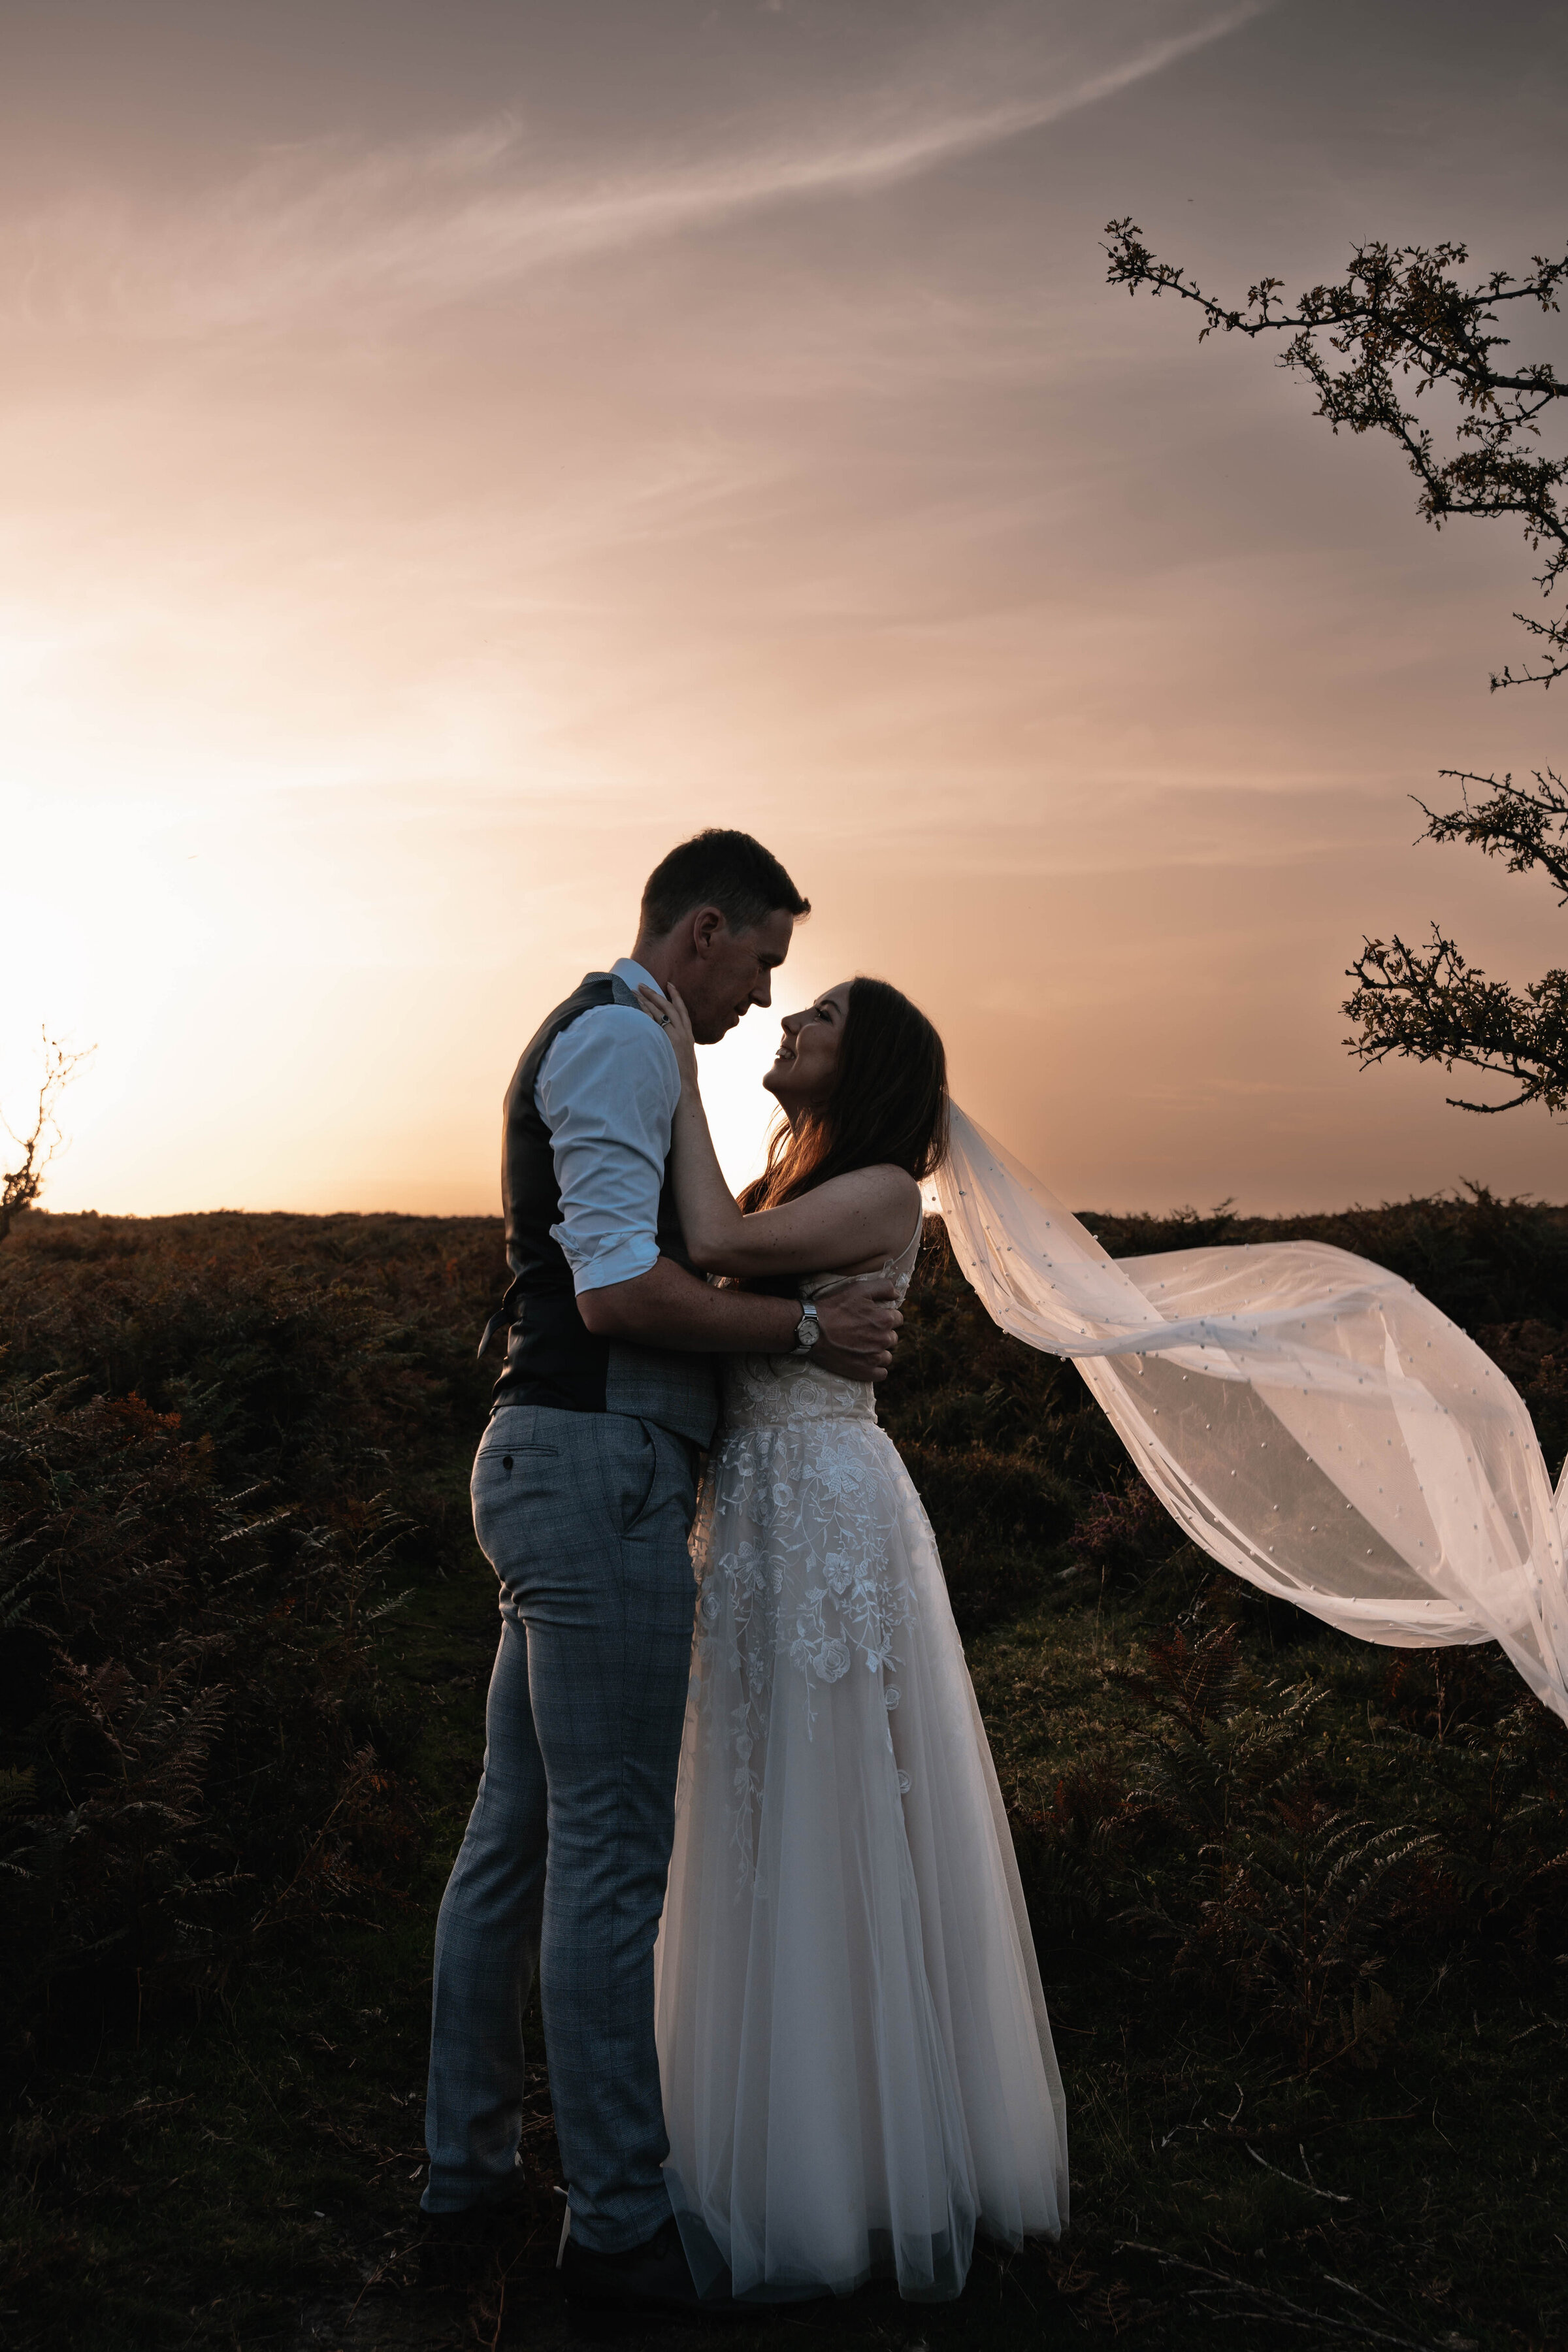 Bride and Groom in wedding attire embracing in front of golden sunset